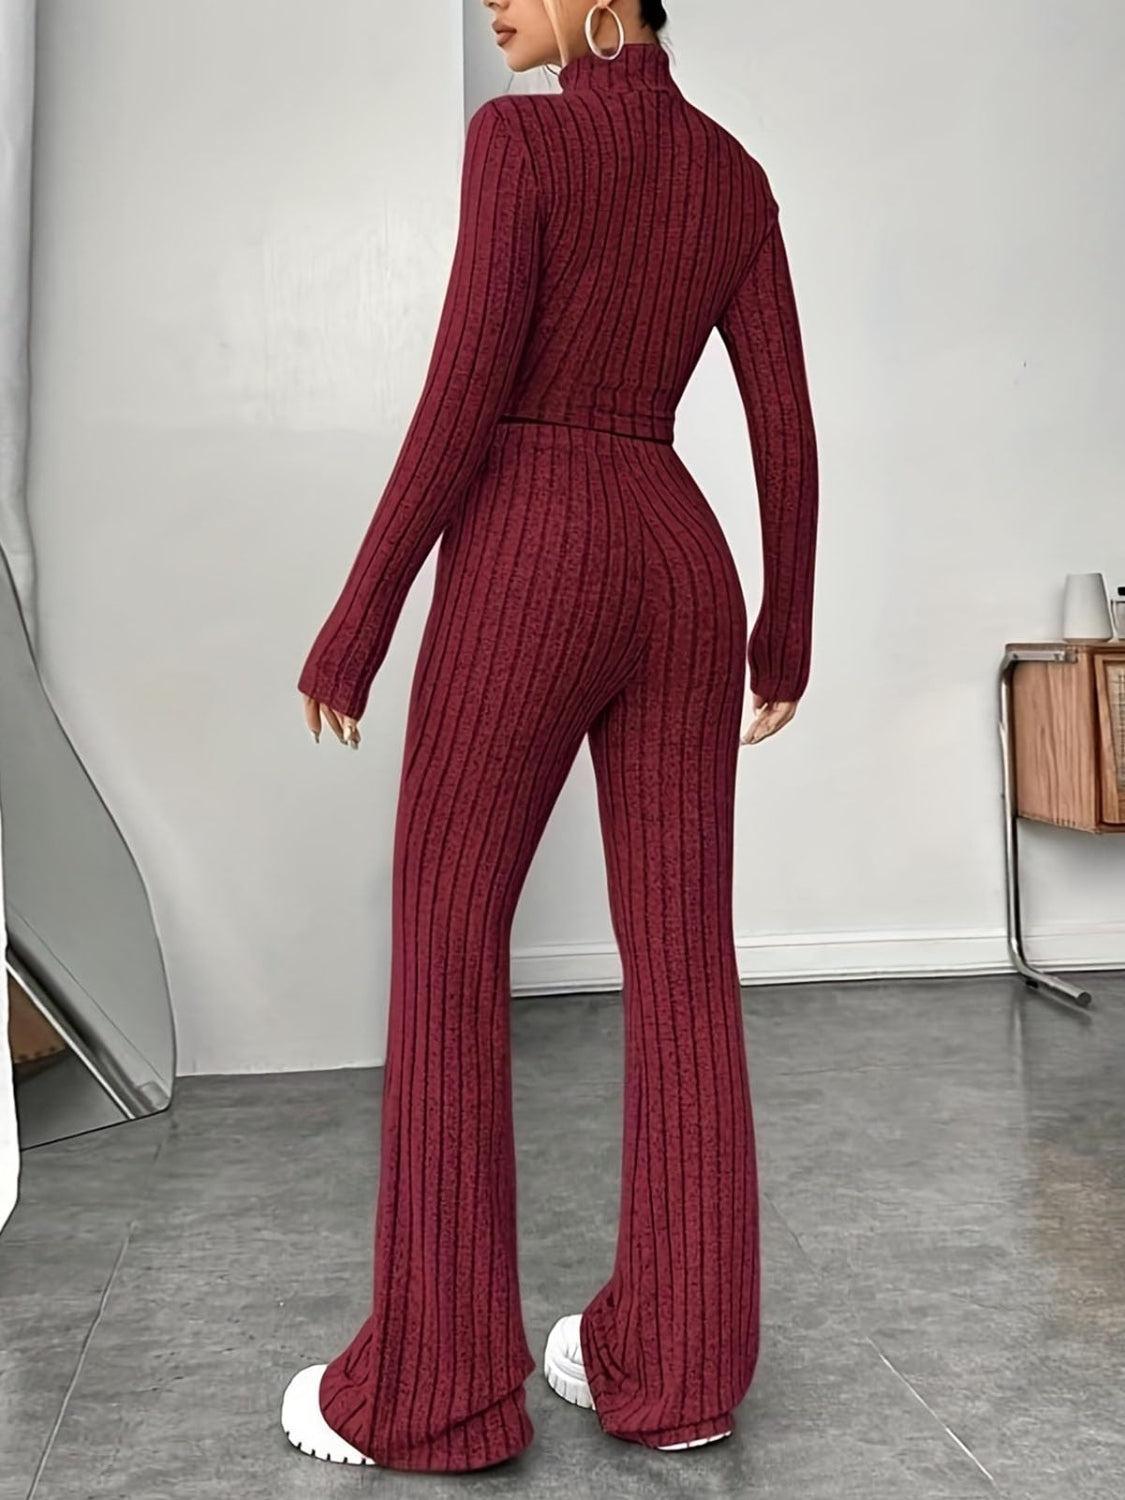 a woman in a red sweater and pants